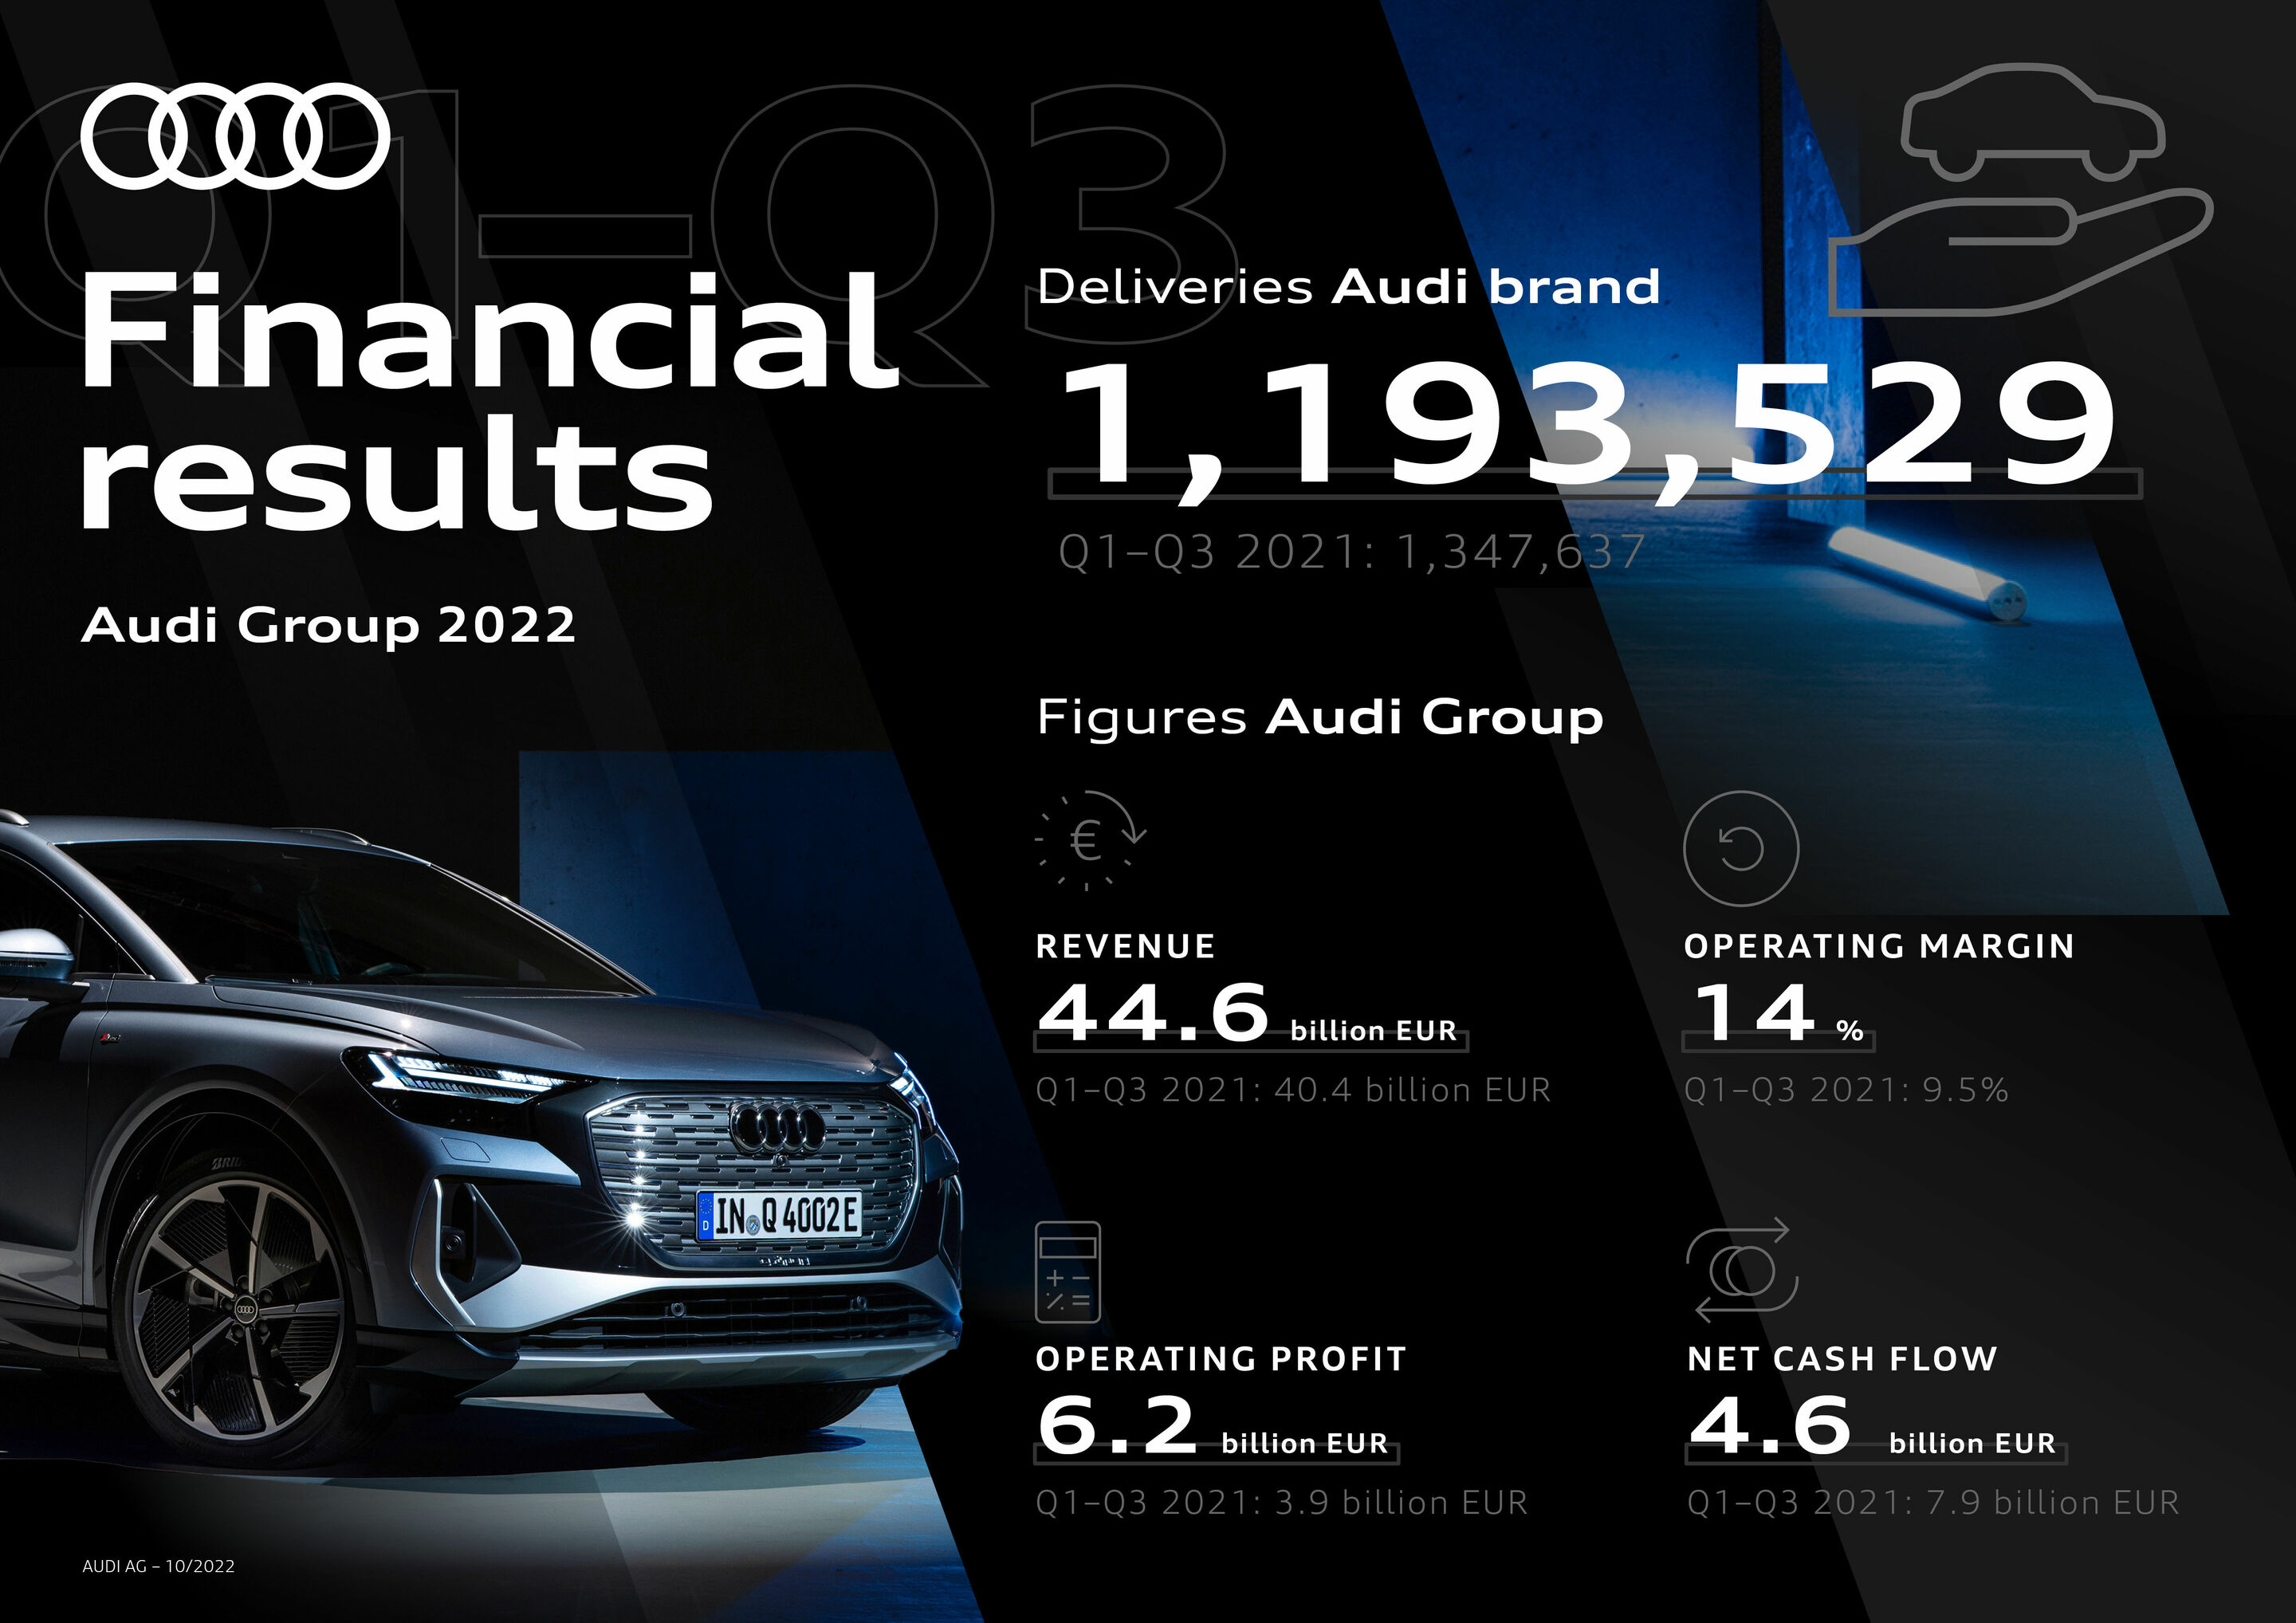 Audi Group: Strong Financial Performance in a Challenging Environment